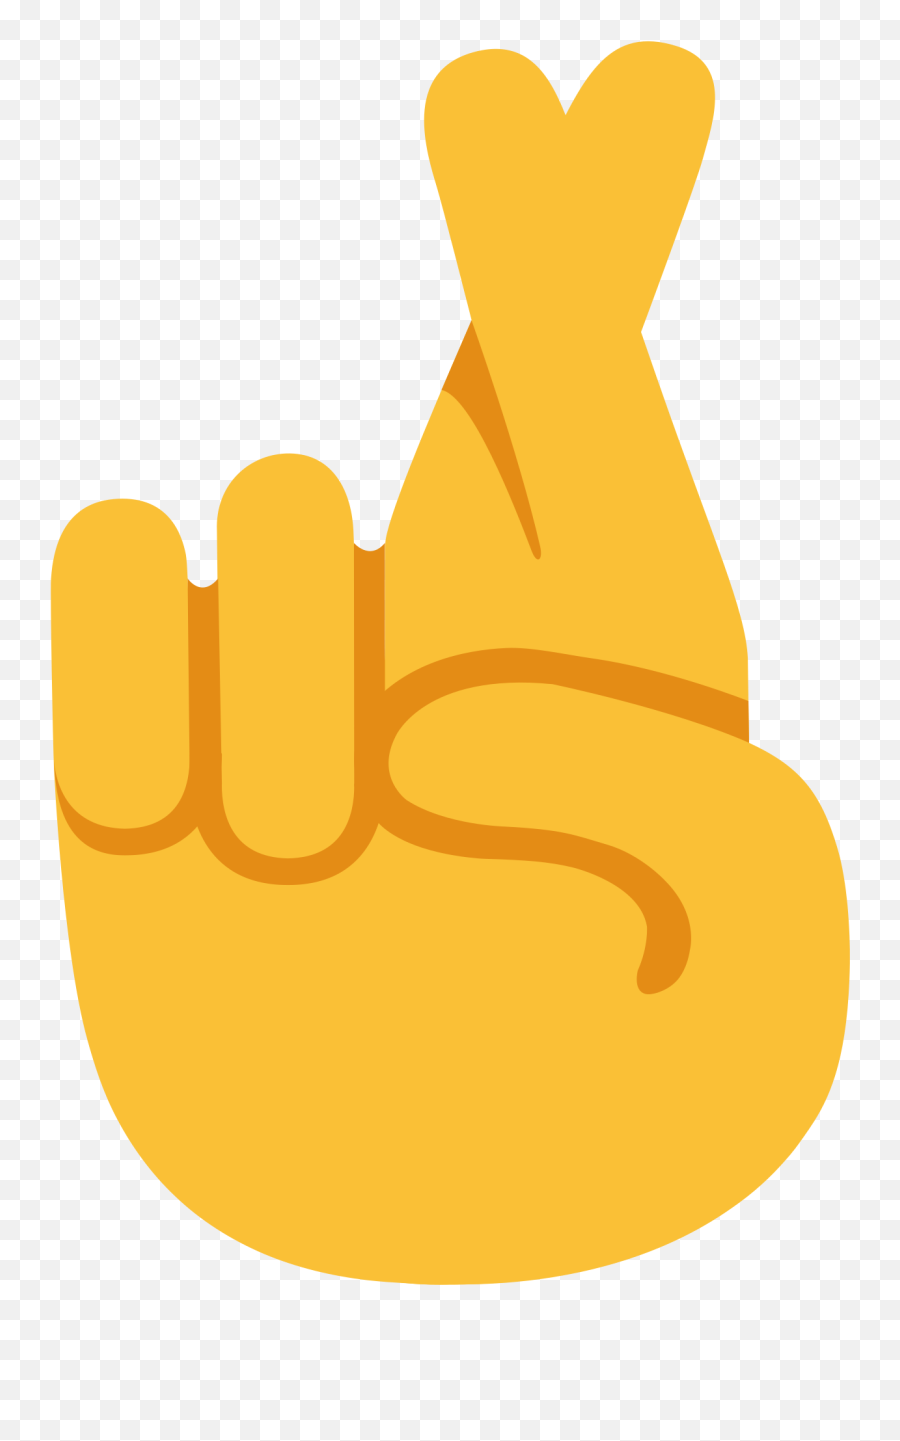 Open - Thumbs Up Png Emoji,Finger Pointing Down Emoji